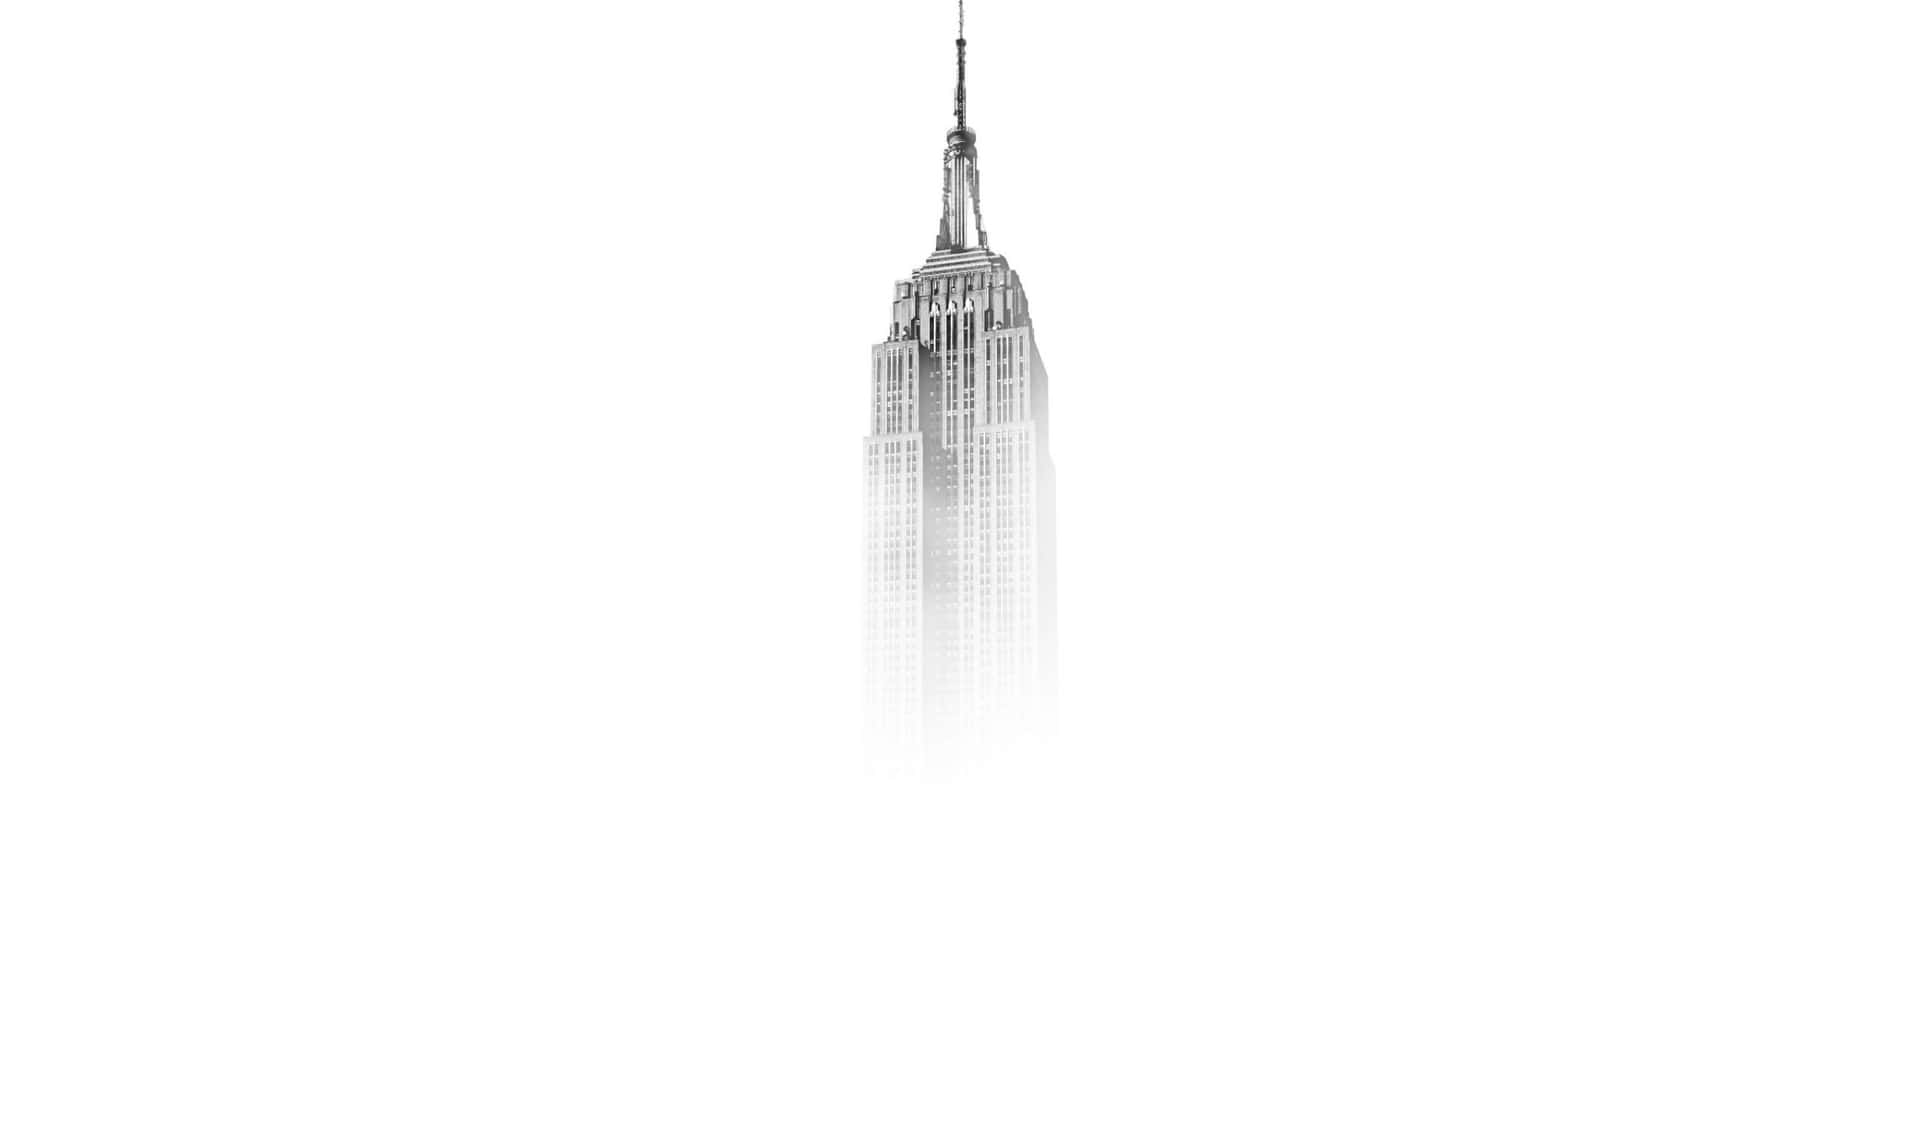 The majestic skyline of the Empire State Building in New York City